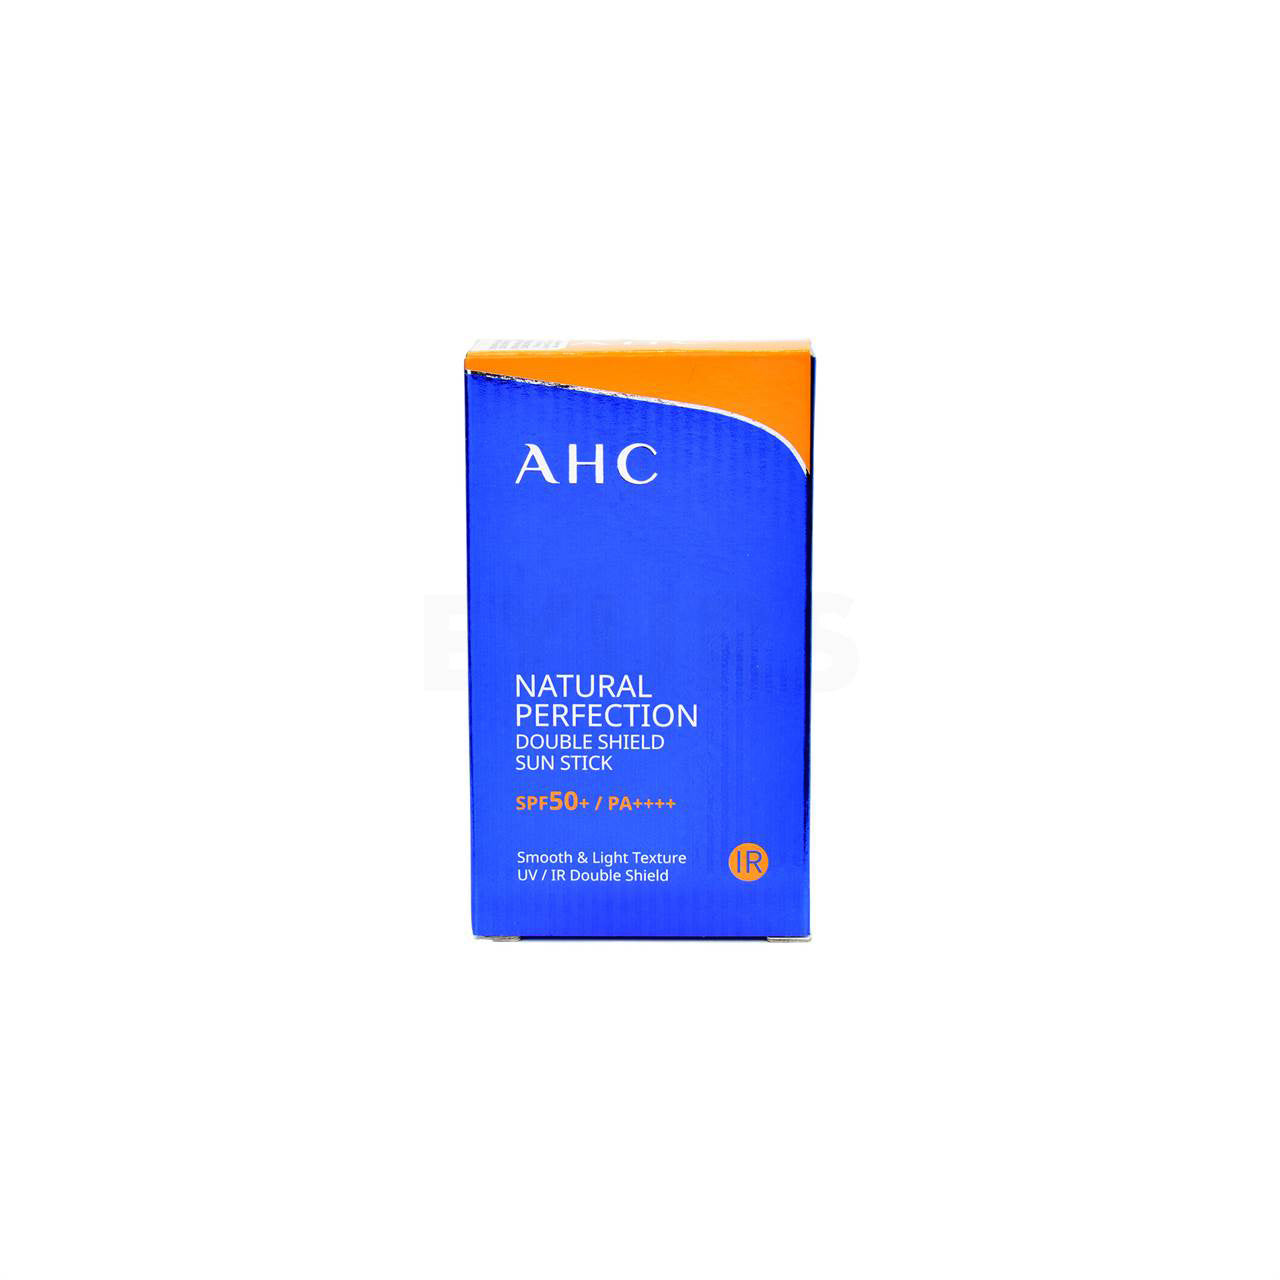 ahc natural perfection double shield sunstick front packaging